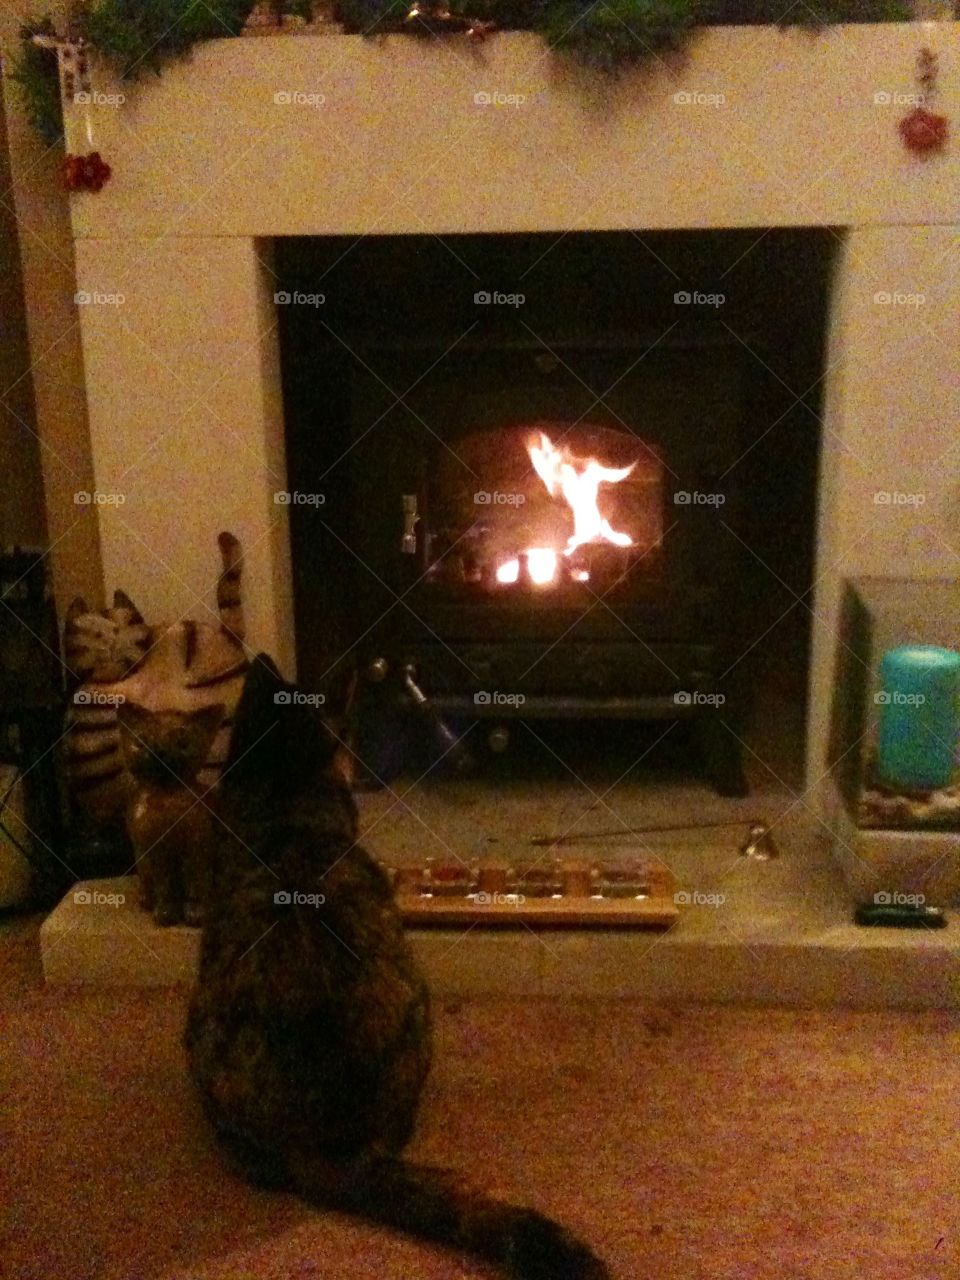 Cats love warmth. Cat watching the fireplace